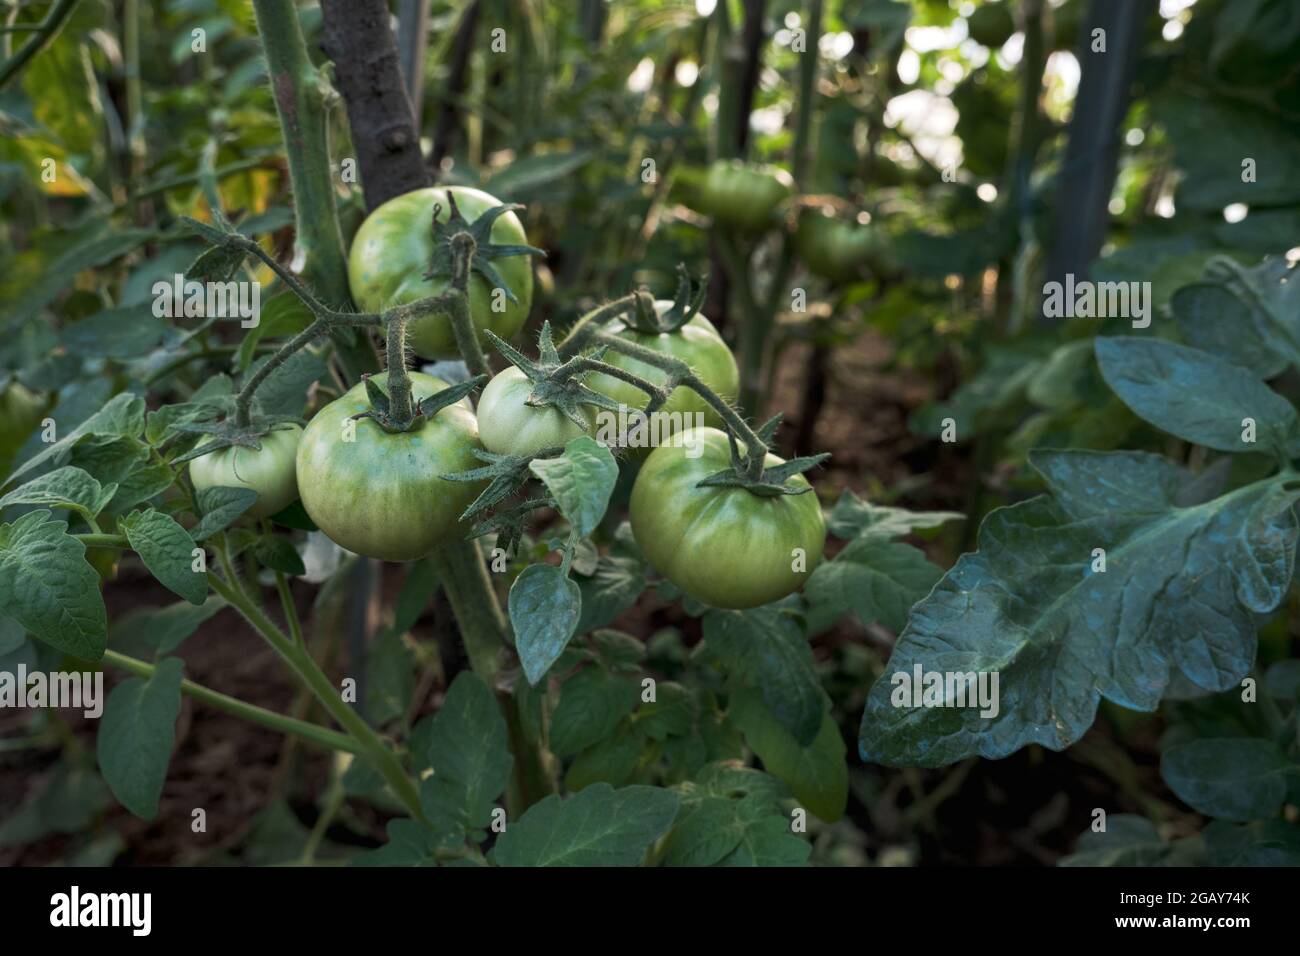 Tomato plant green fruits ripening in the hothouse Stock Photo